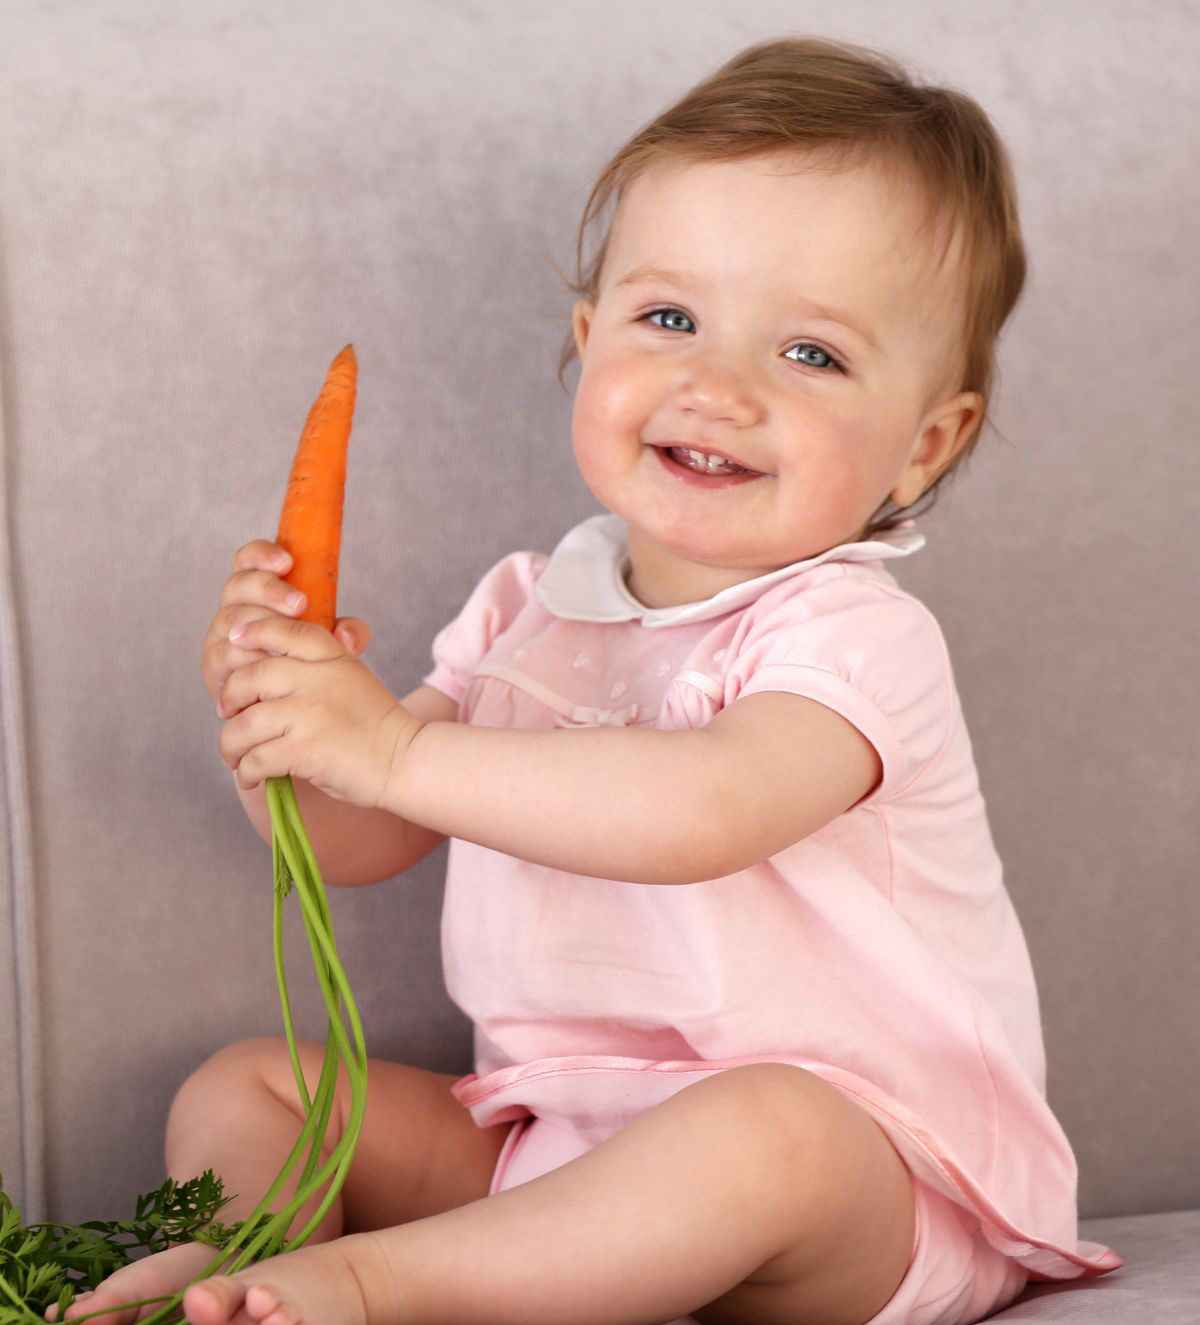 Baby holding a carrot.